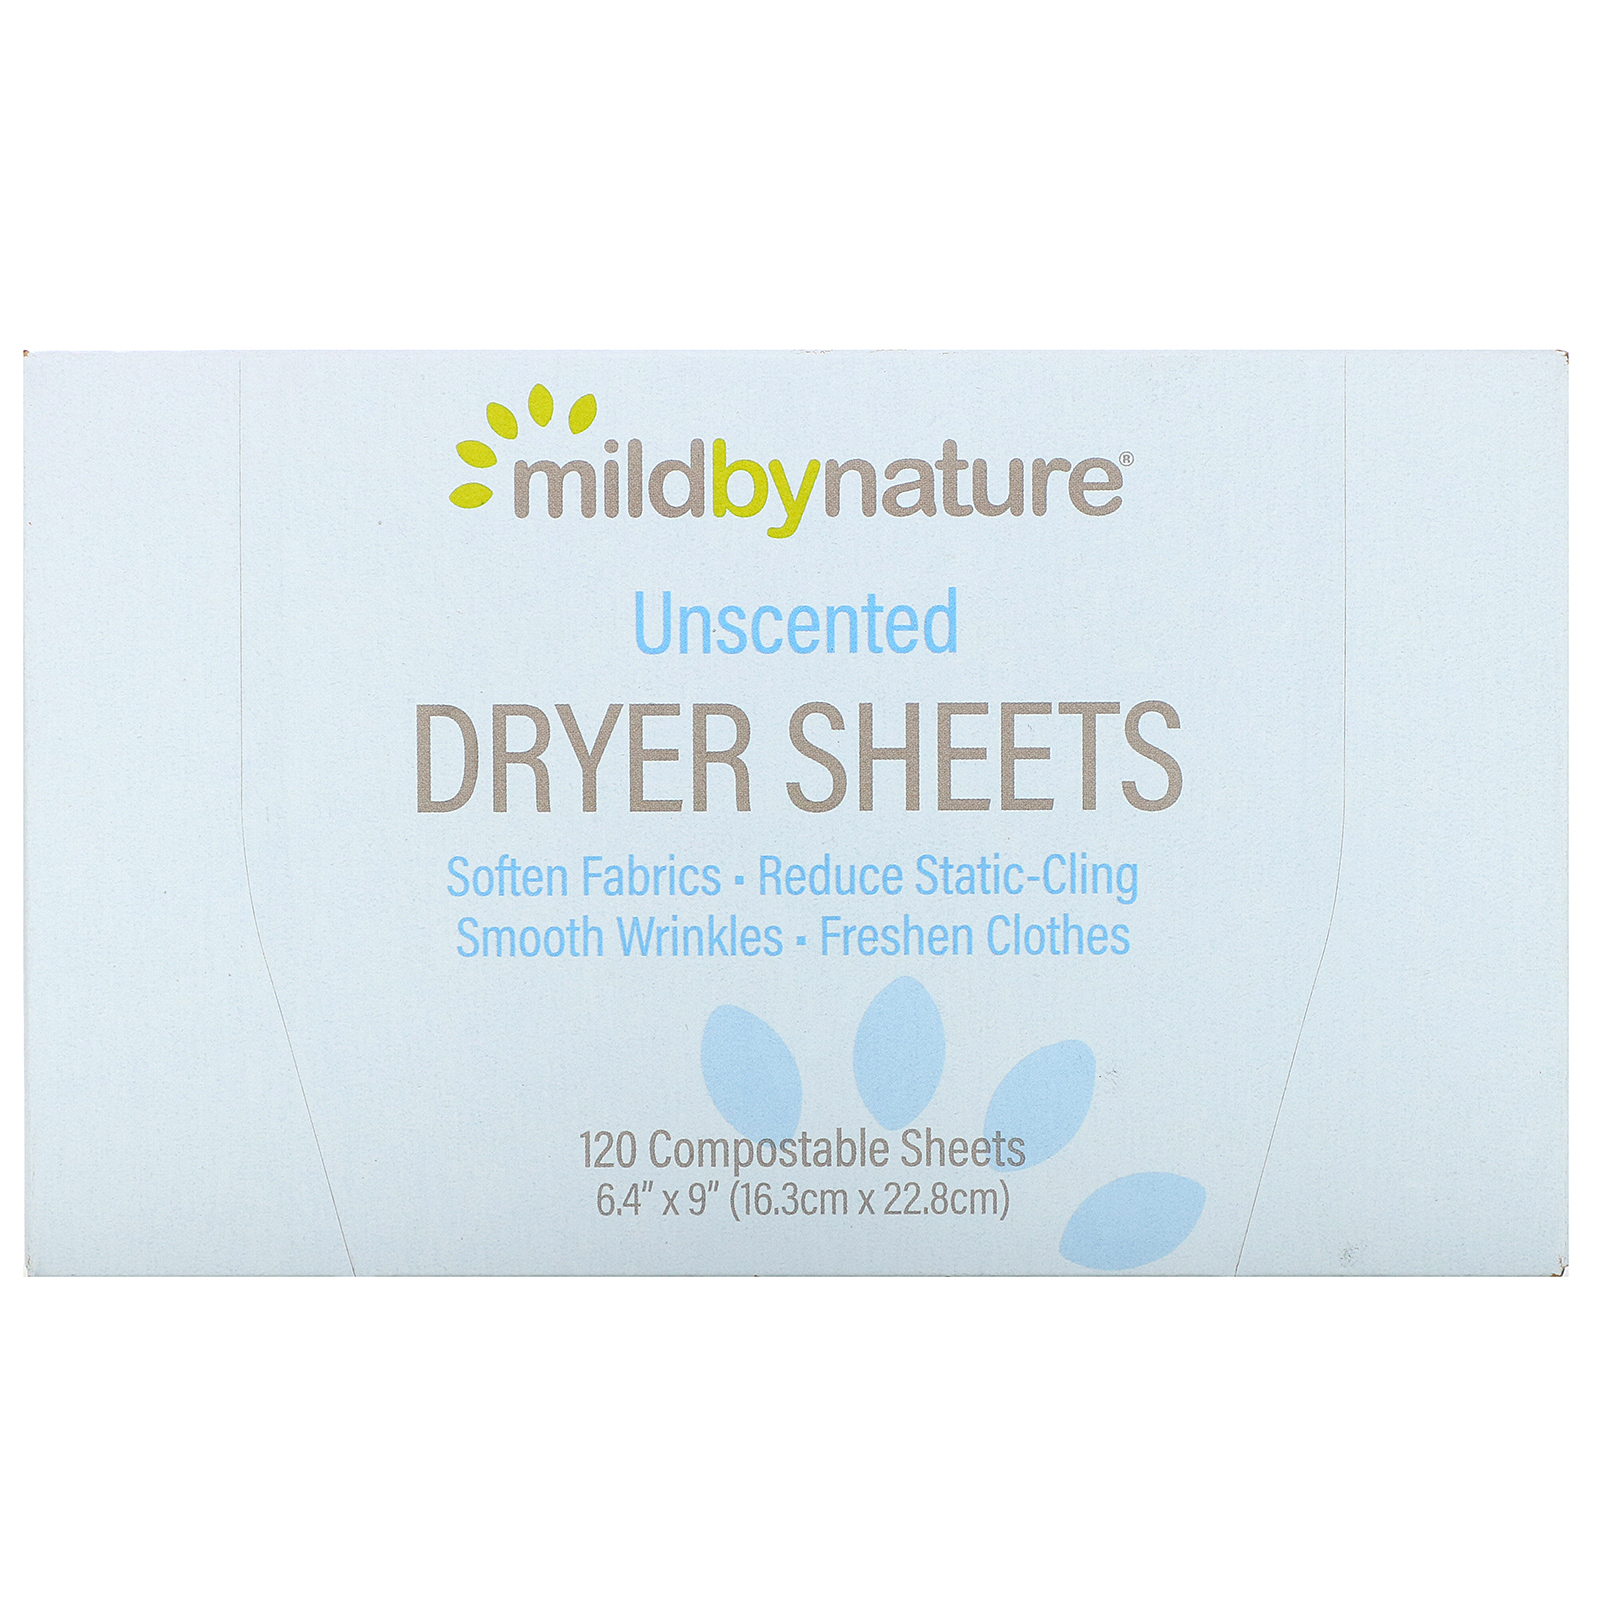 Dryer Sheets, Unscented, 120 Compostable Sheets, Mild By Nature - image 1 of 2